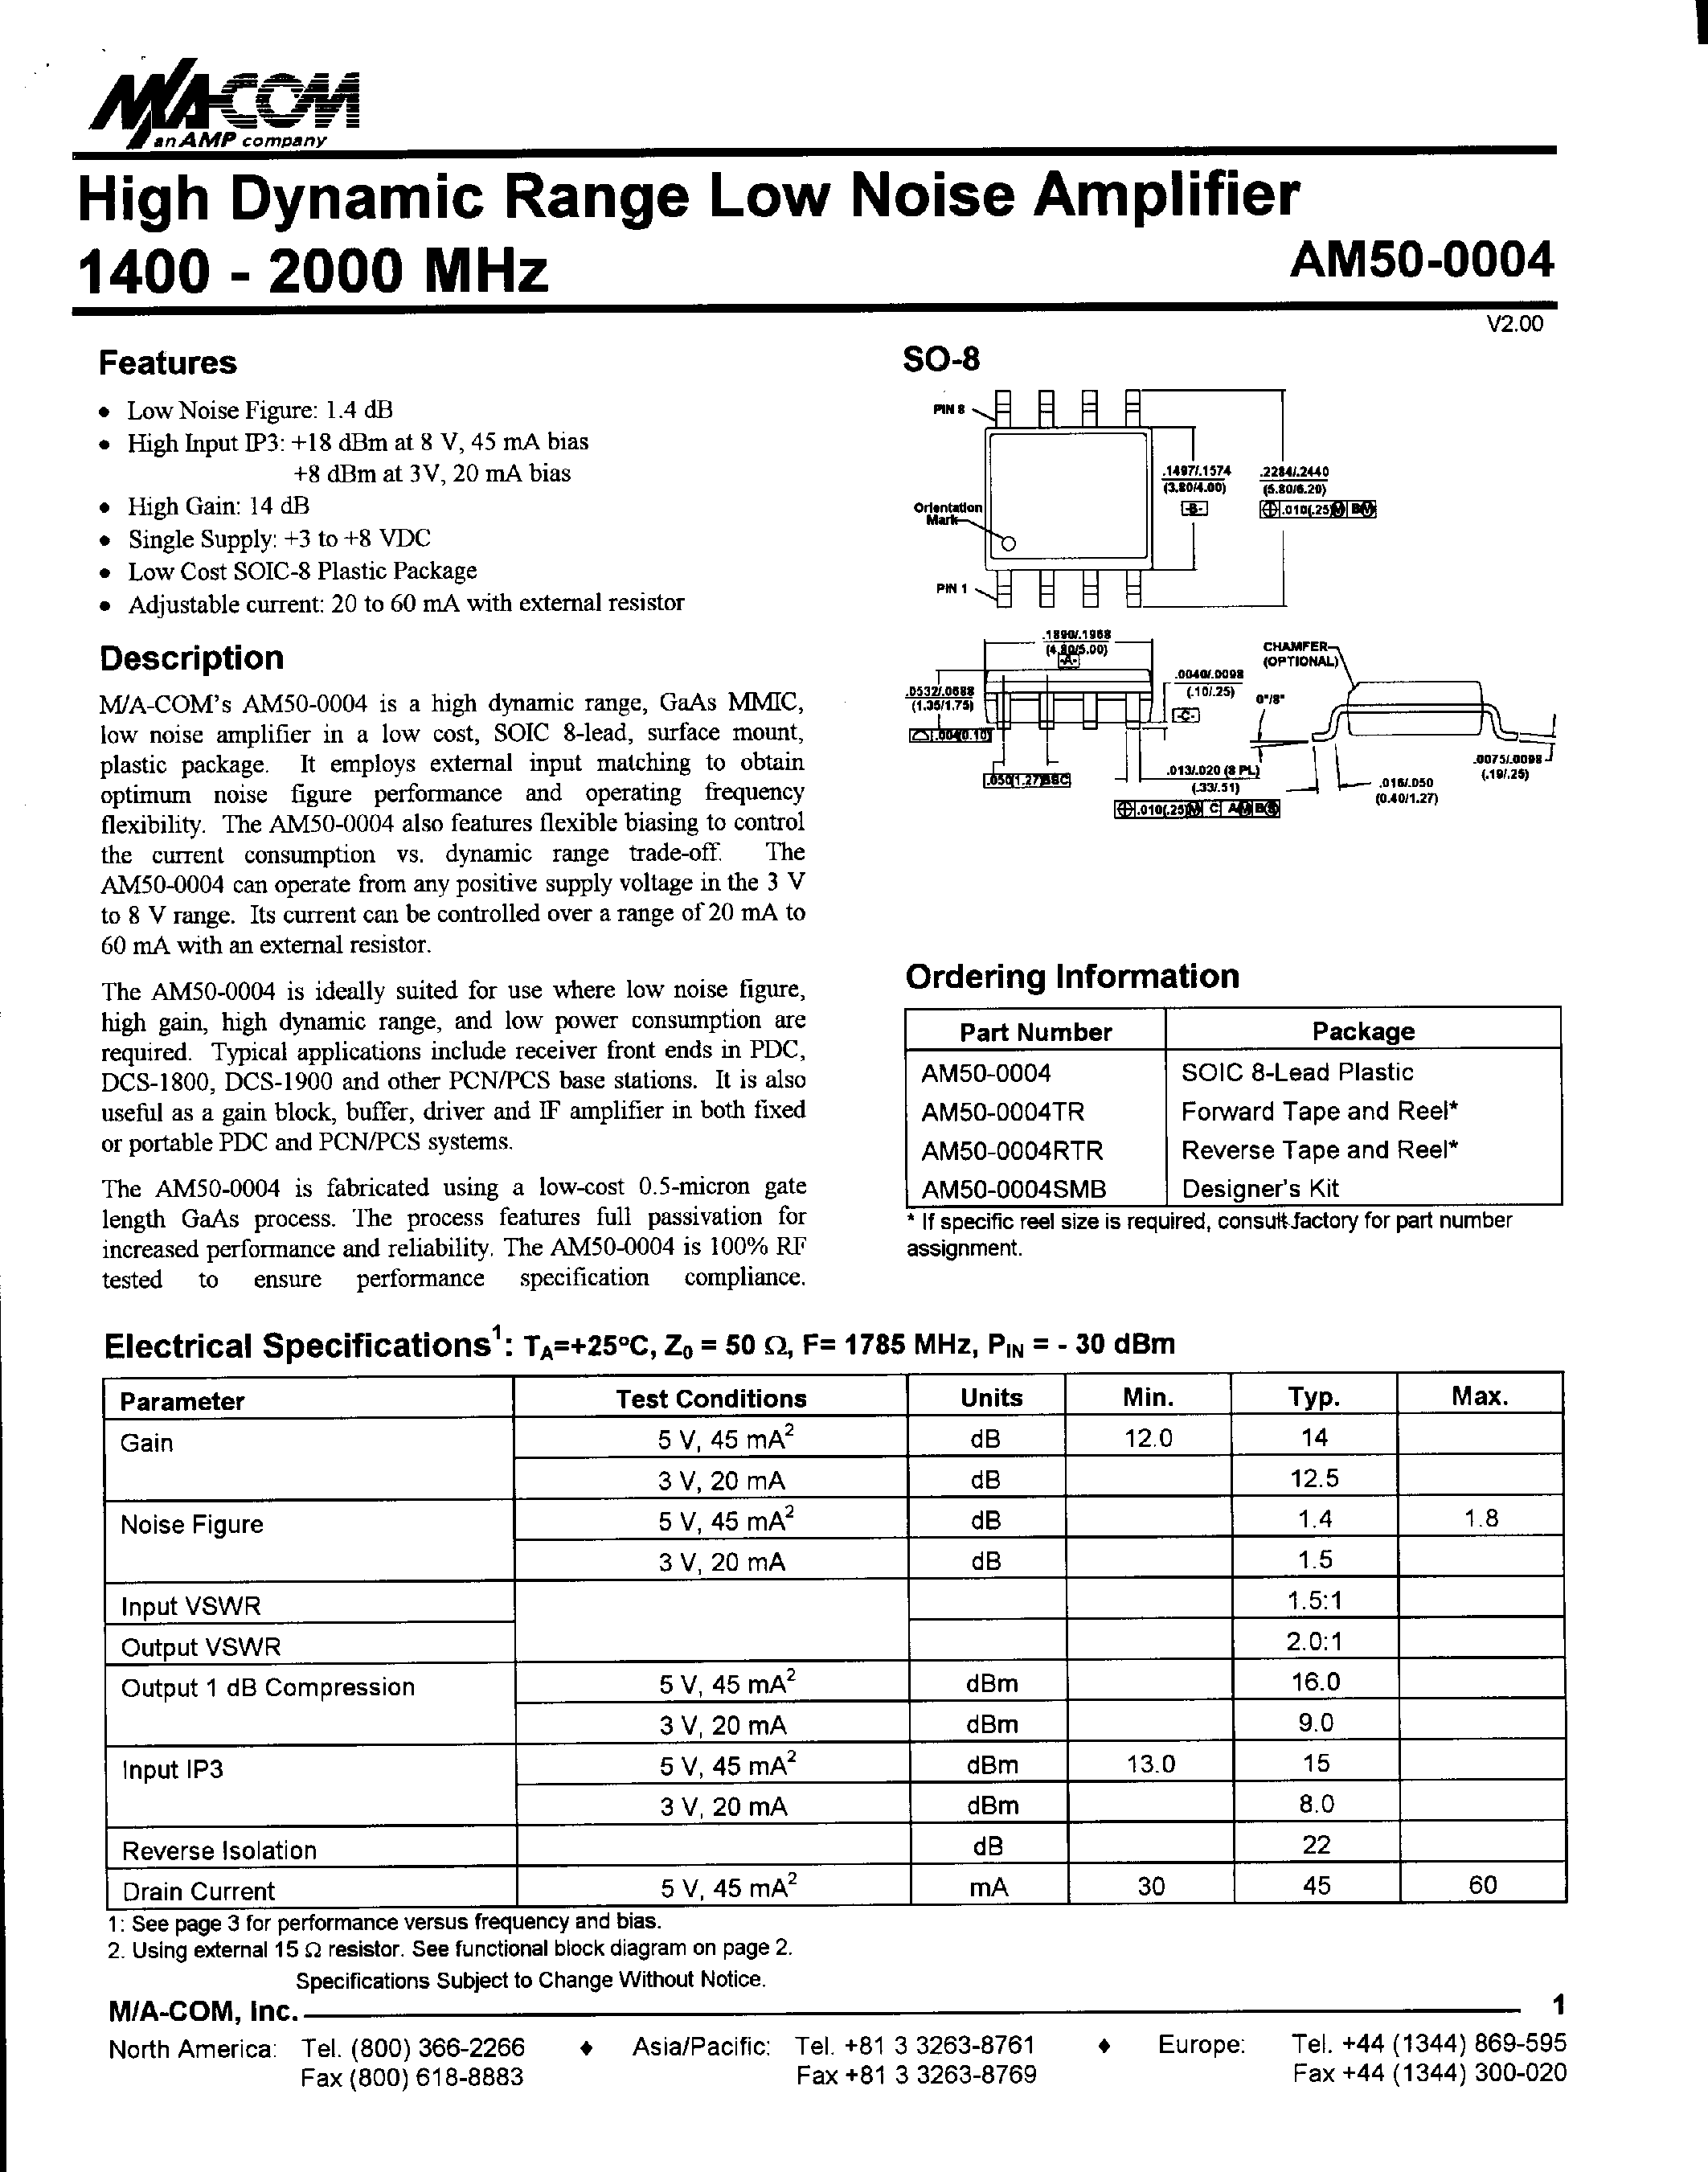 Datasheet AM50-0004RTR - High Dynamic Range Low Noise Amplifier 1400-2000 MHz page 1